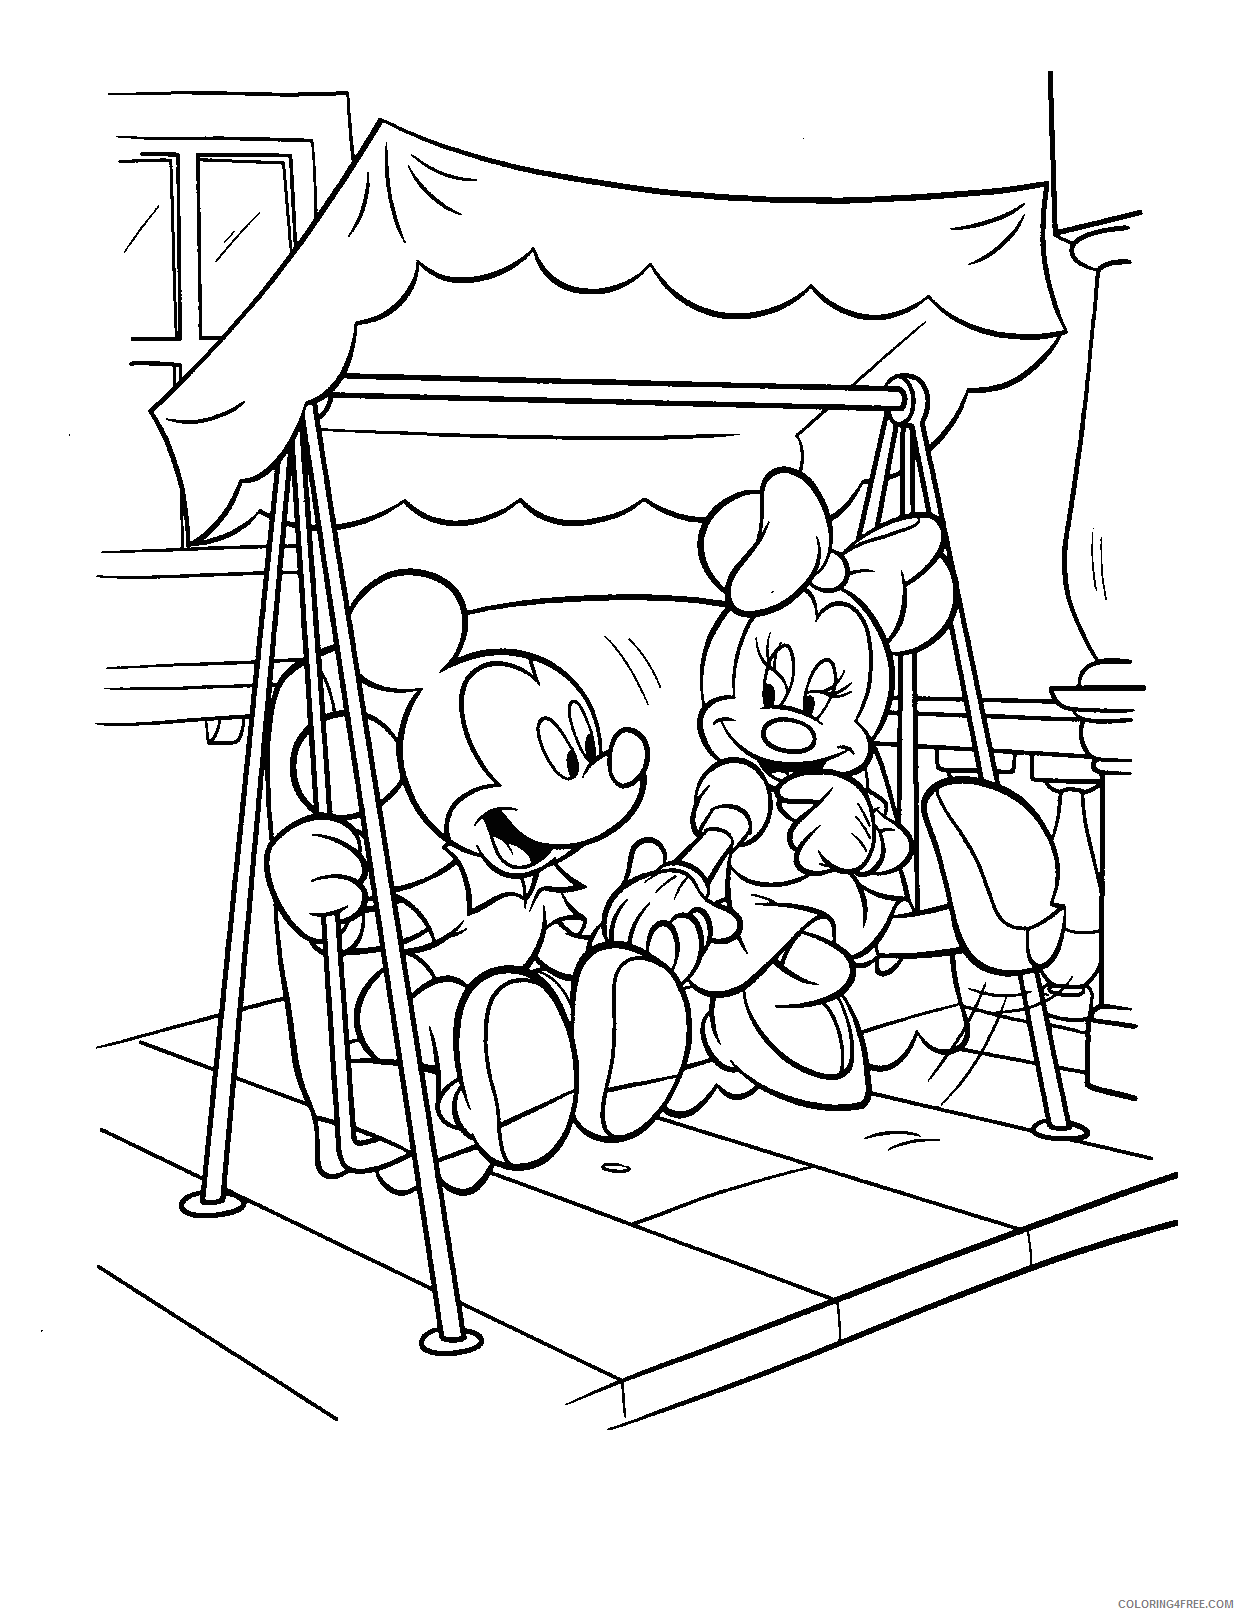 Mickey Mouse Coloring Pages Cartoons of Mickey and Minnie Mouse Printable 2020 4063 Coloring4free